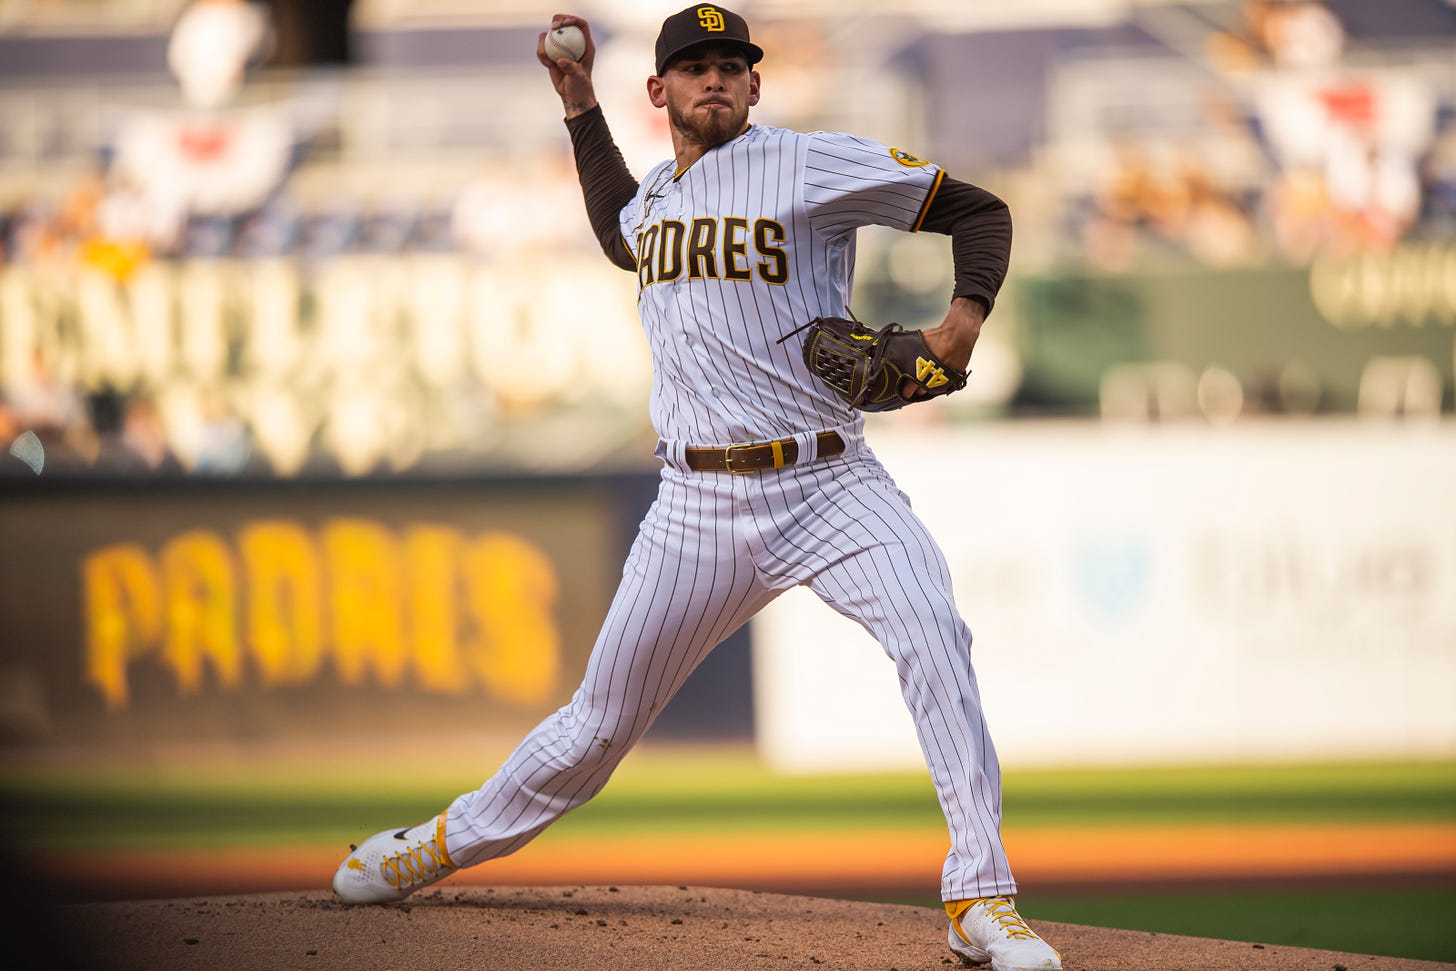 Padres: Joe Musgrove could be the steal of the offseason